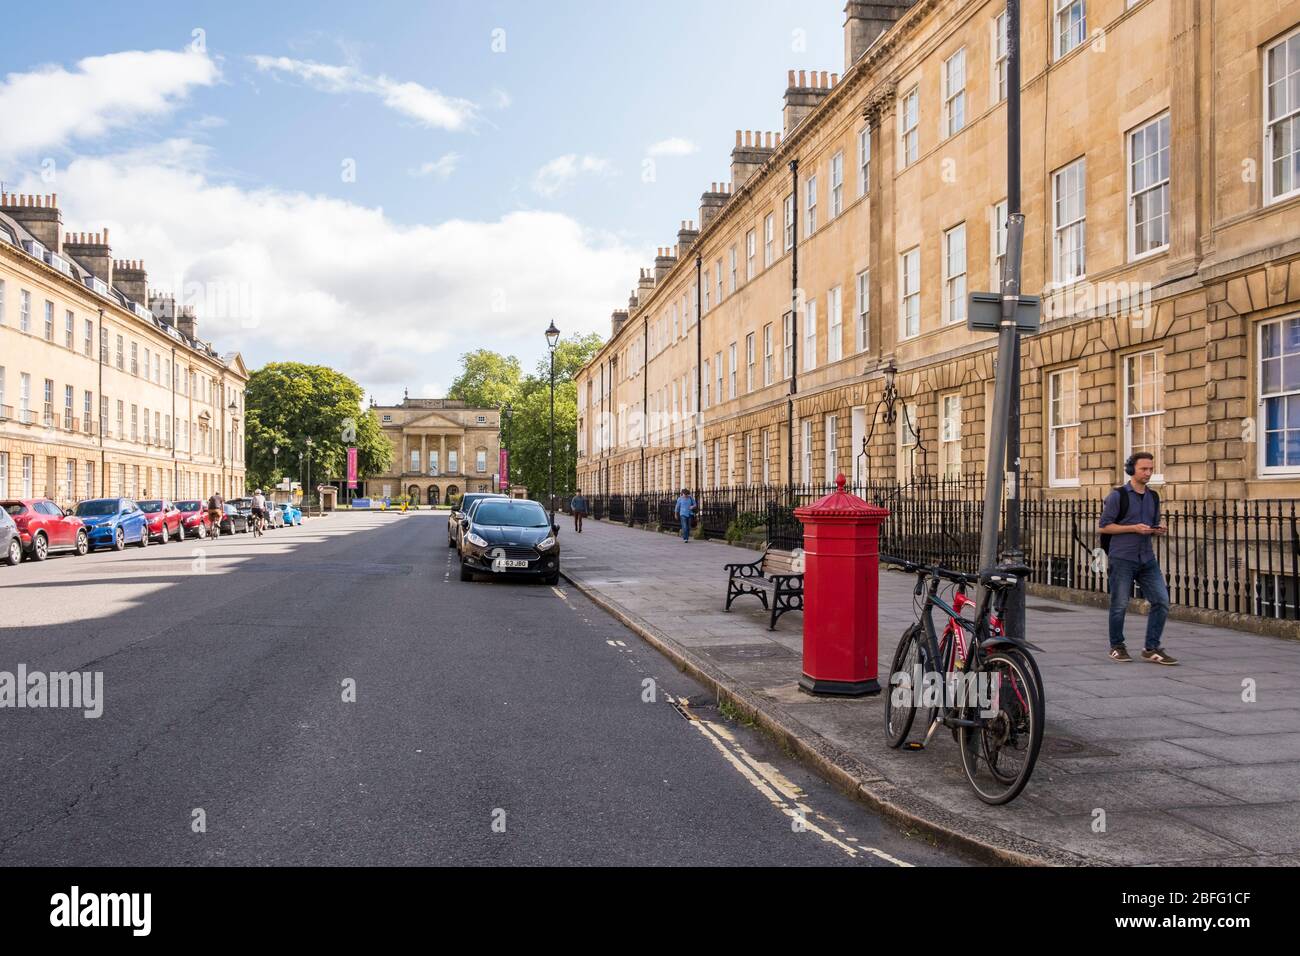 Great Pulteney Street, Bath, Somerset, Angleterre, GB, Royaume-Uni Banque D'Images